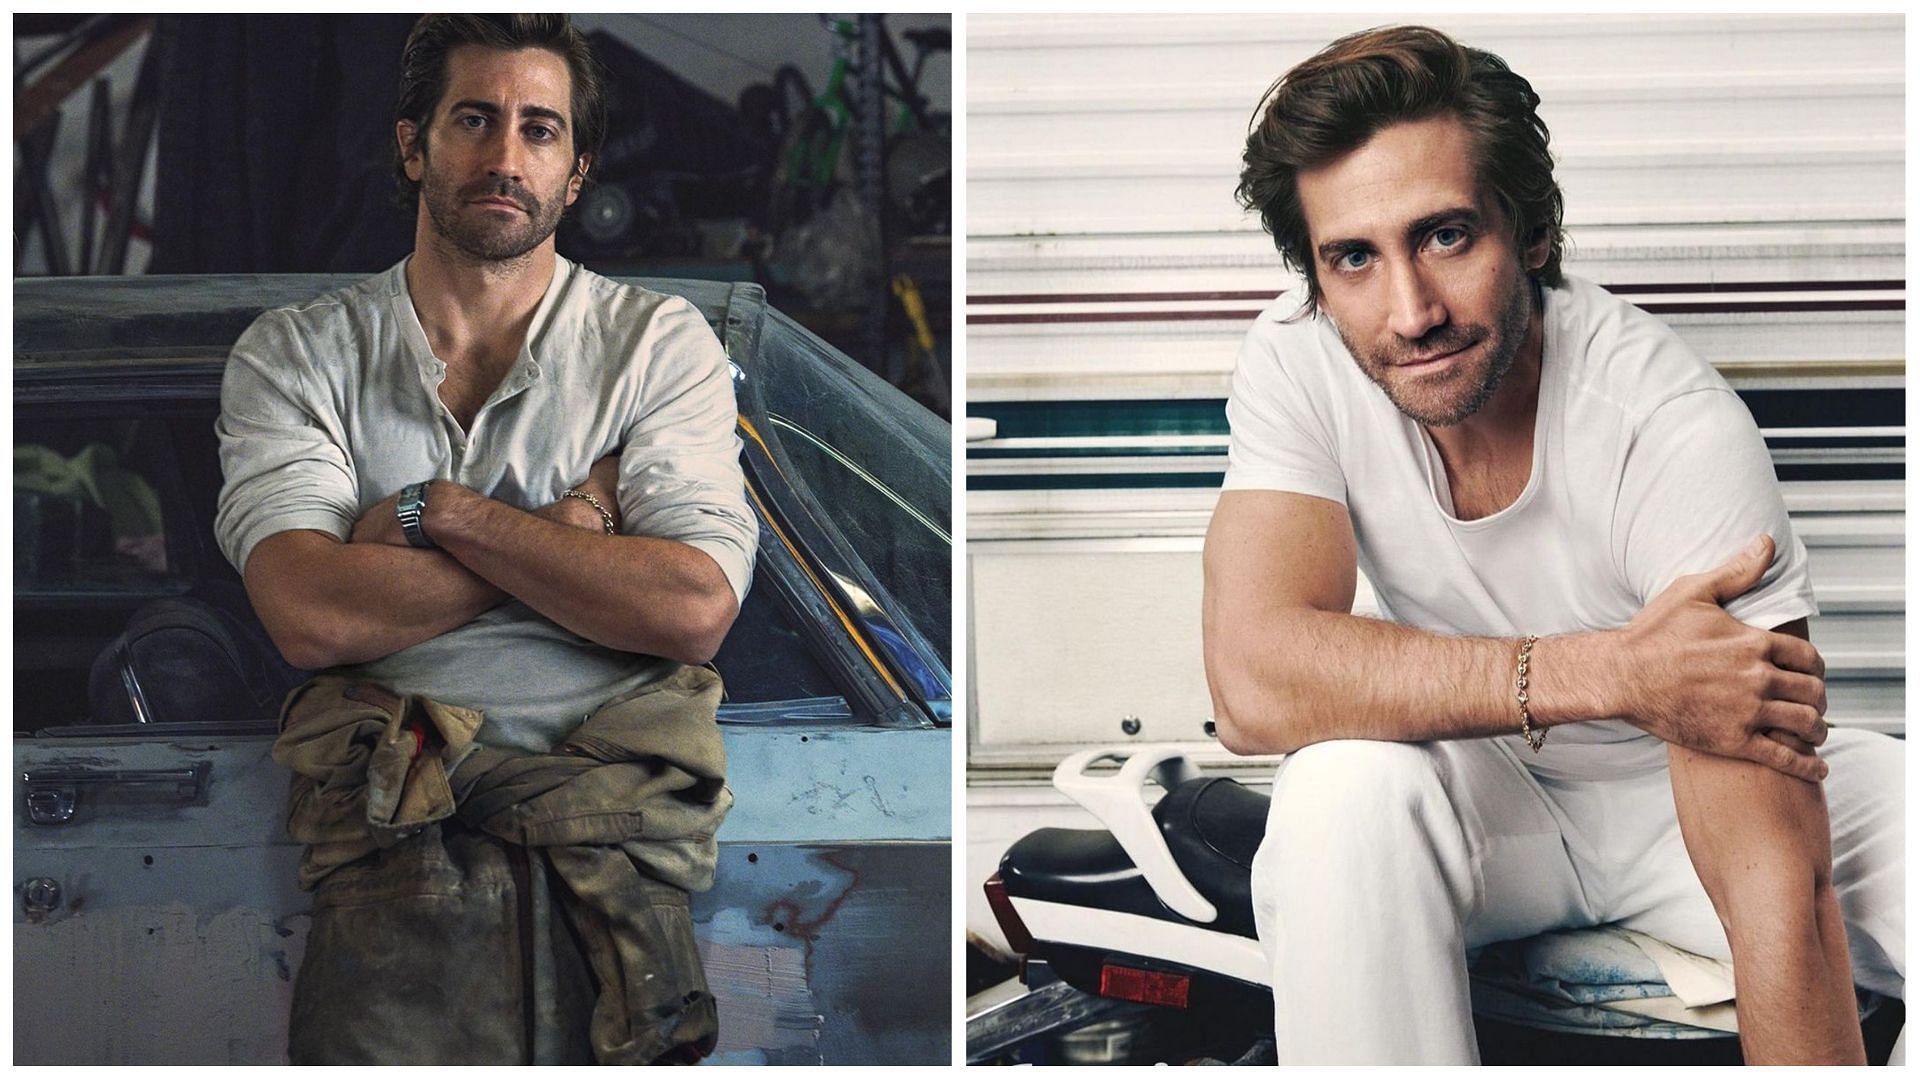 Jake Gyllenhaal put himself through a brutal exercise before &quot;Southpaw&quot;. (Image via Instagram)